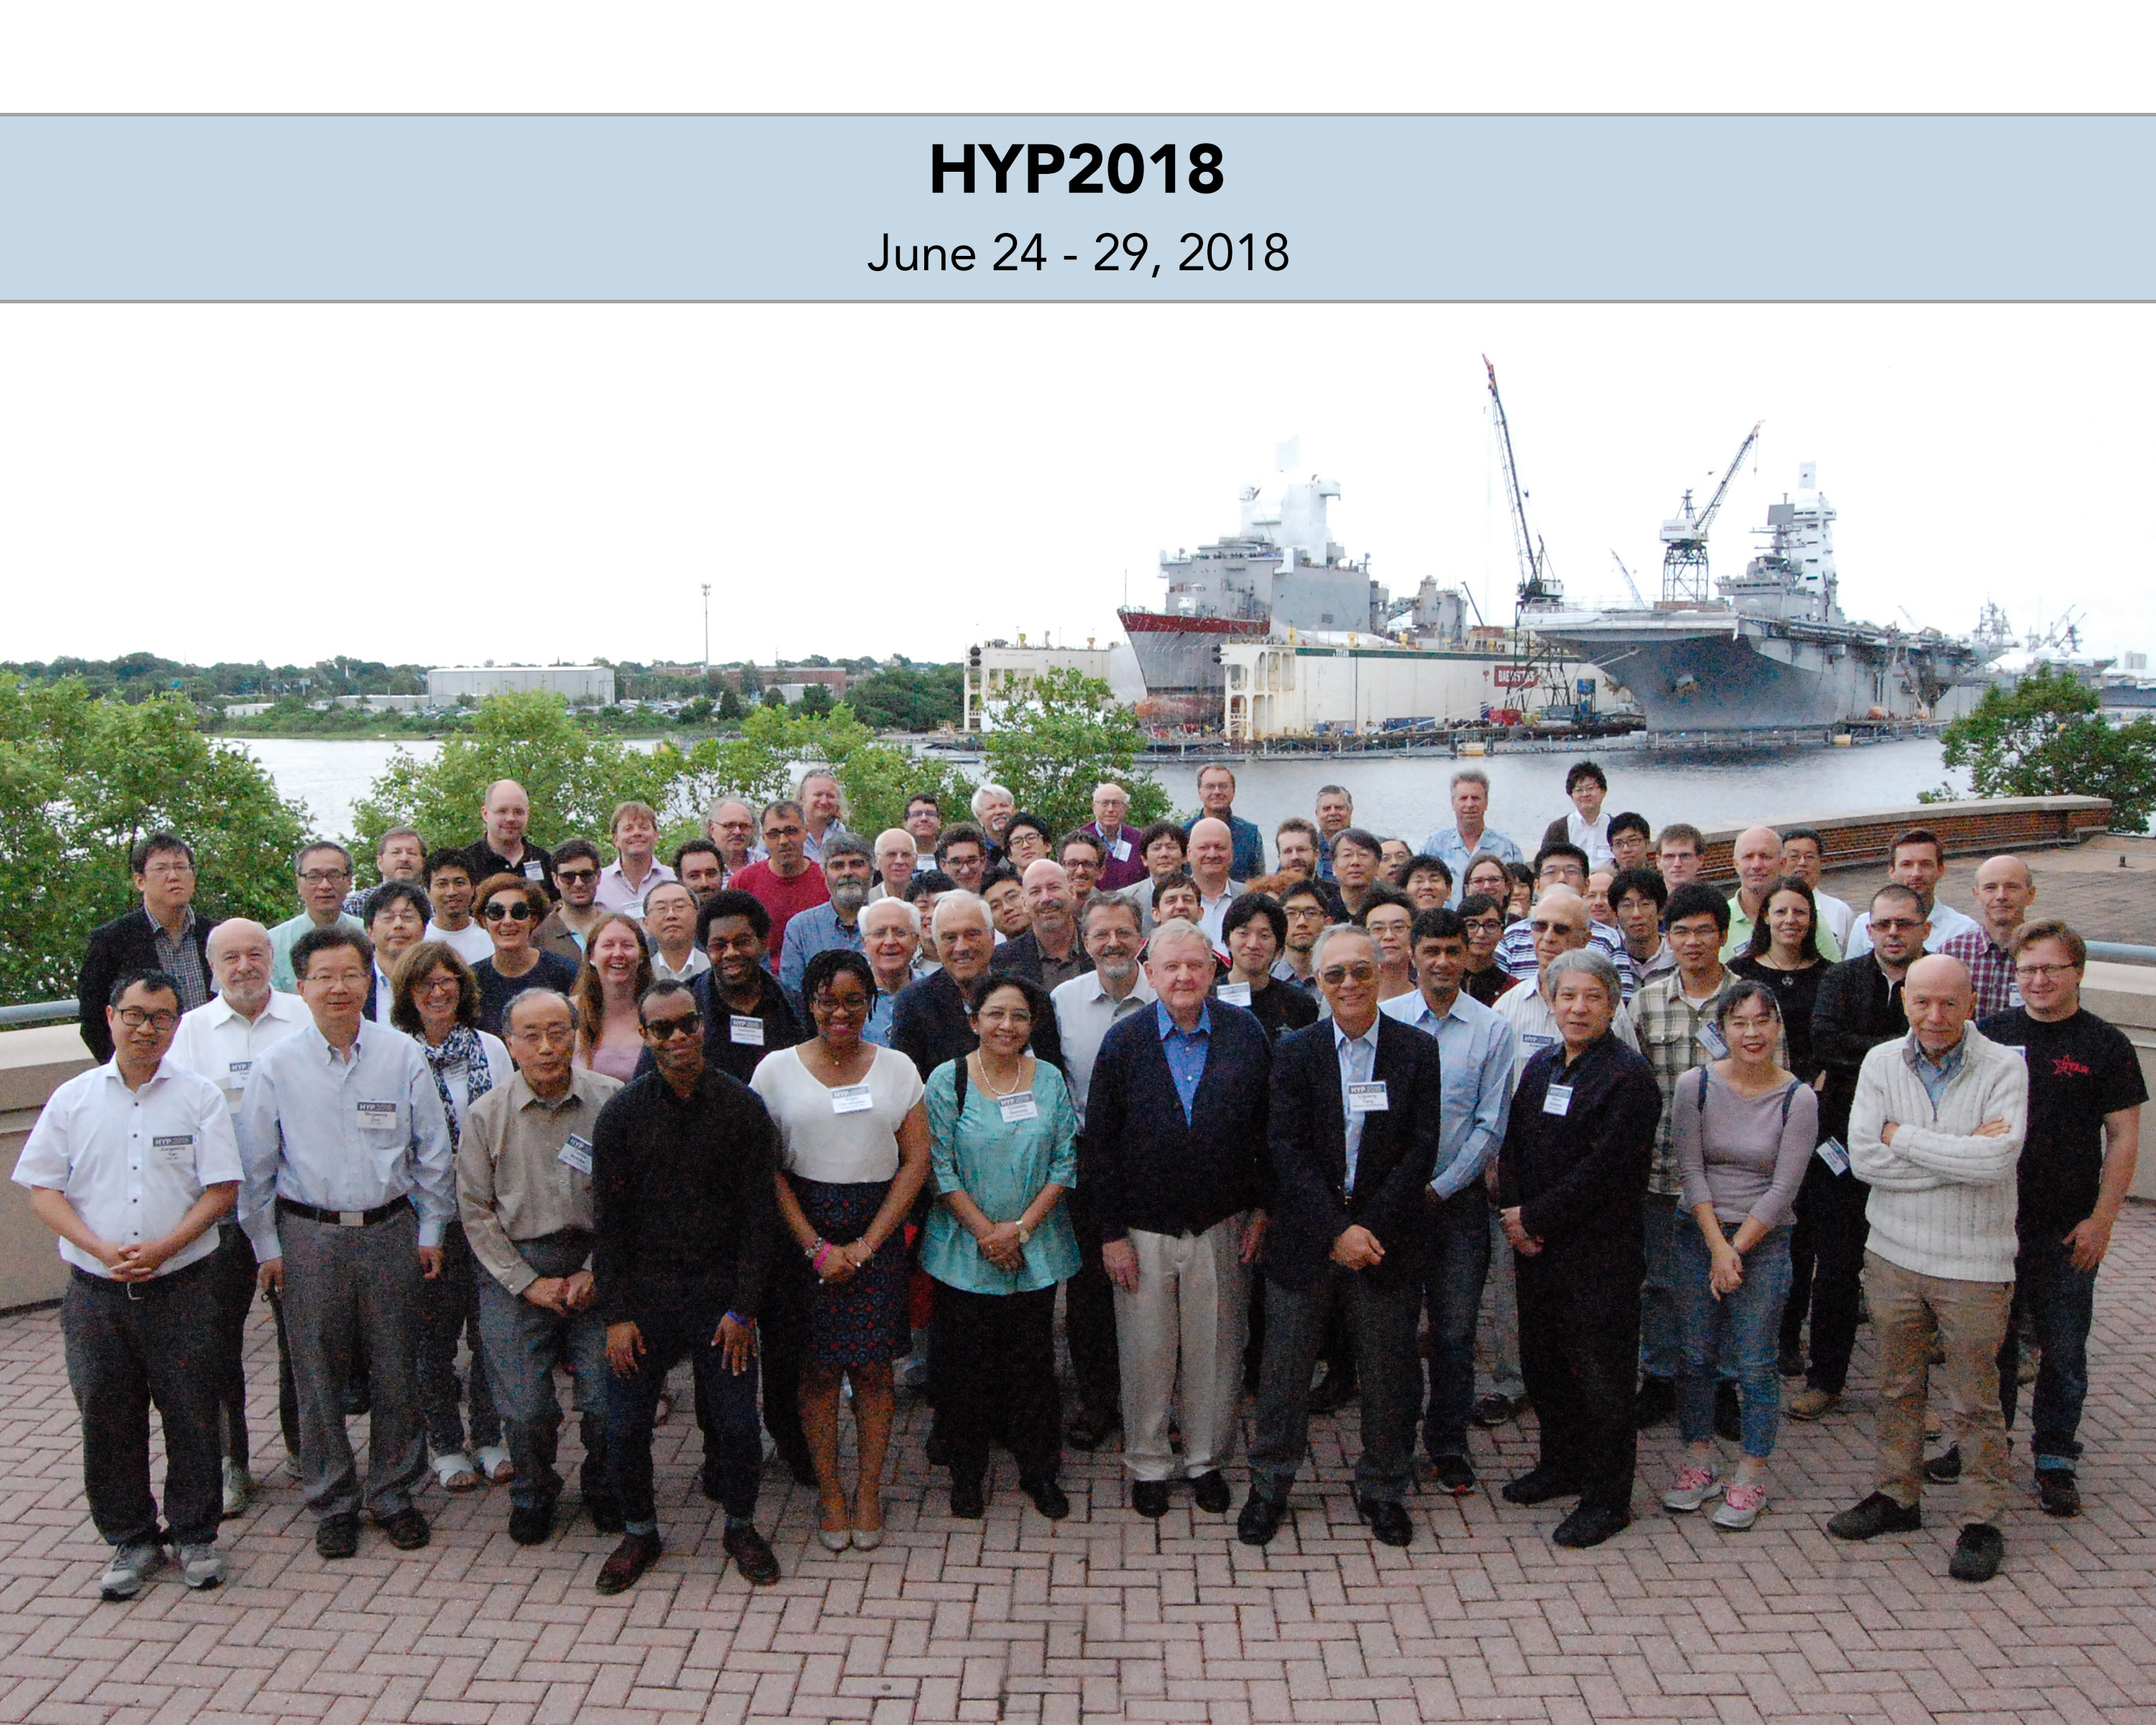 HYP2018 Group Photo